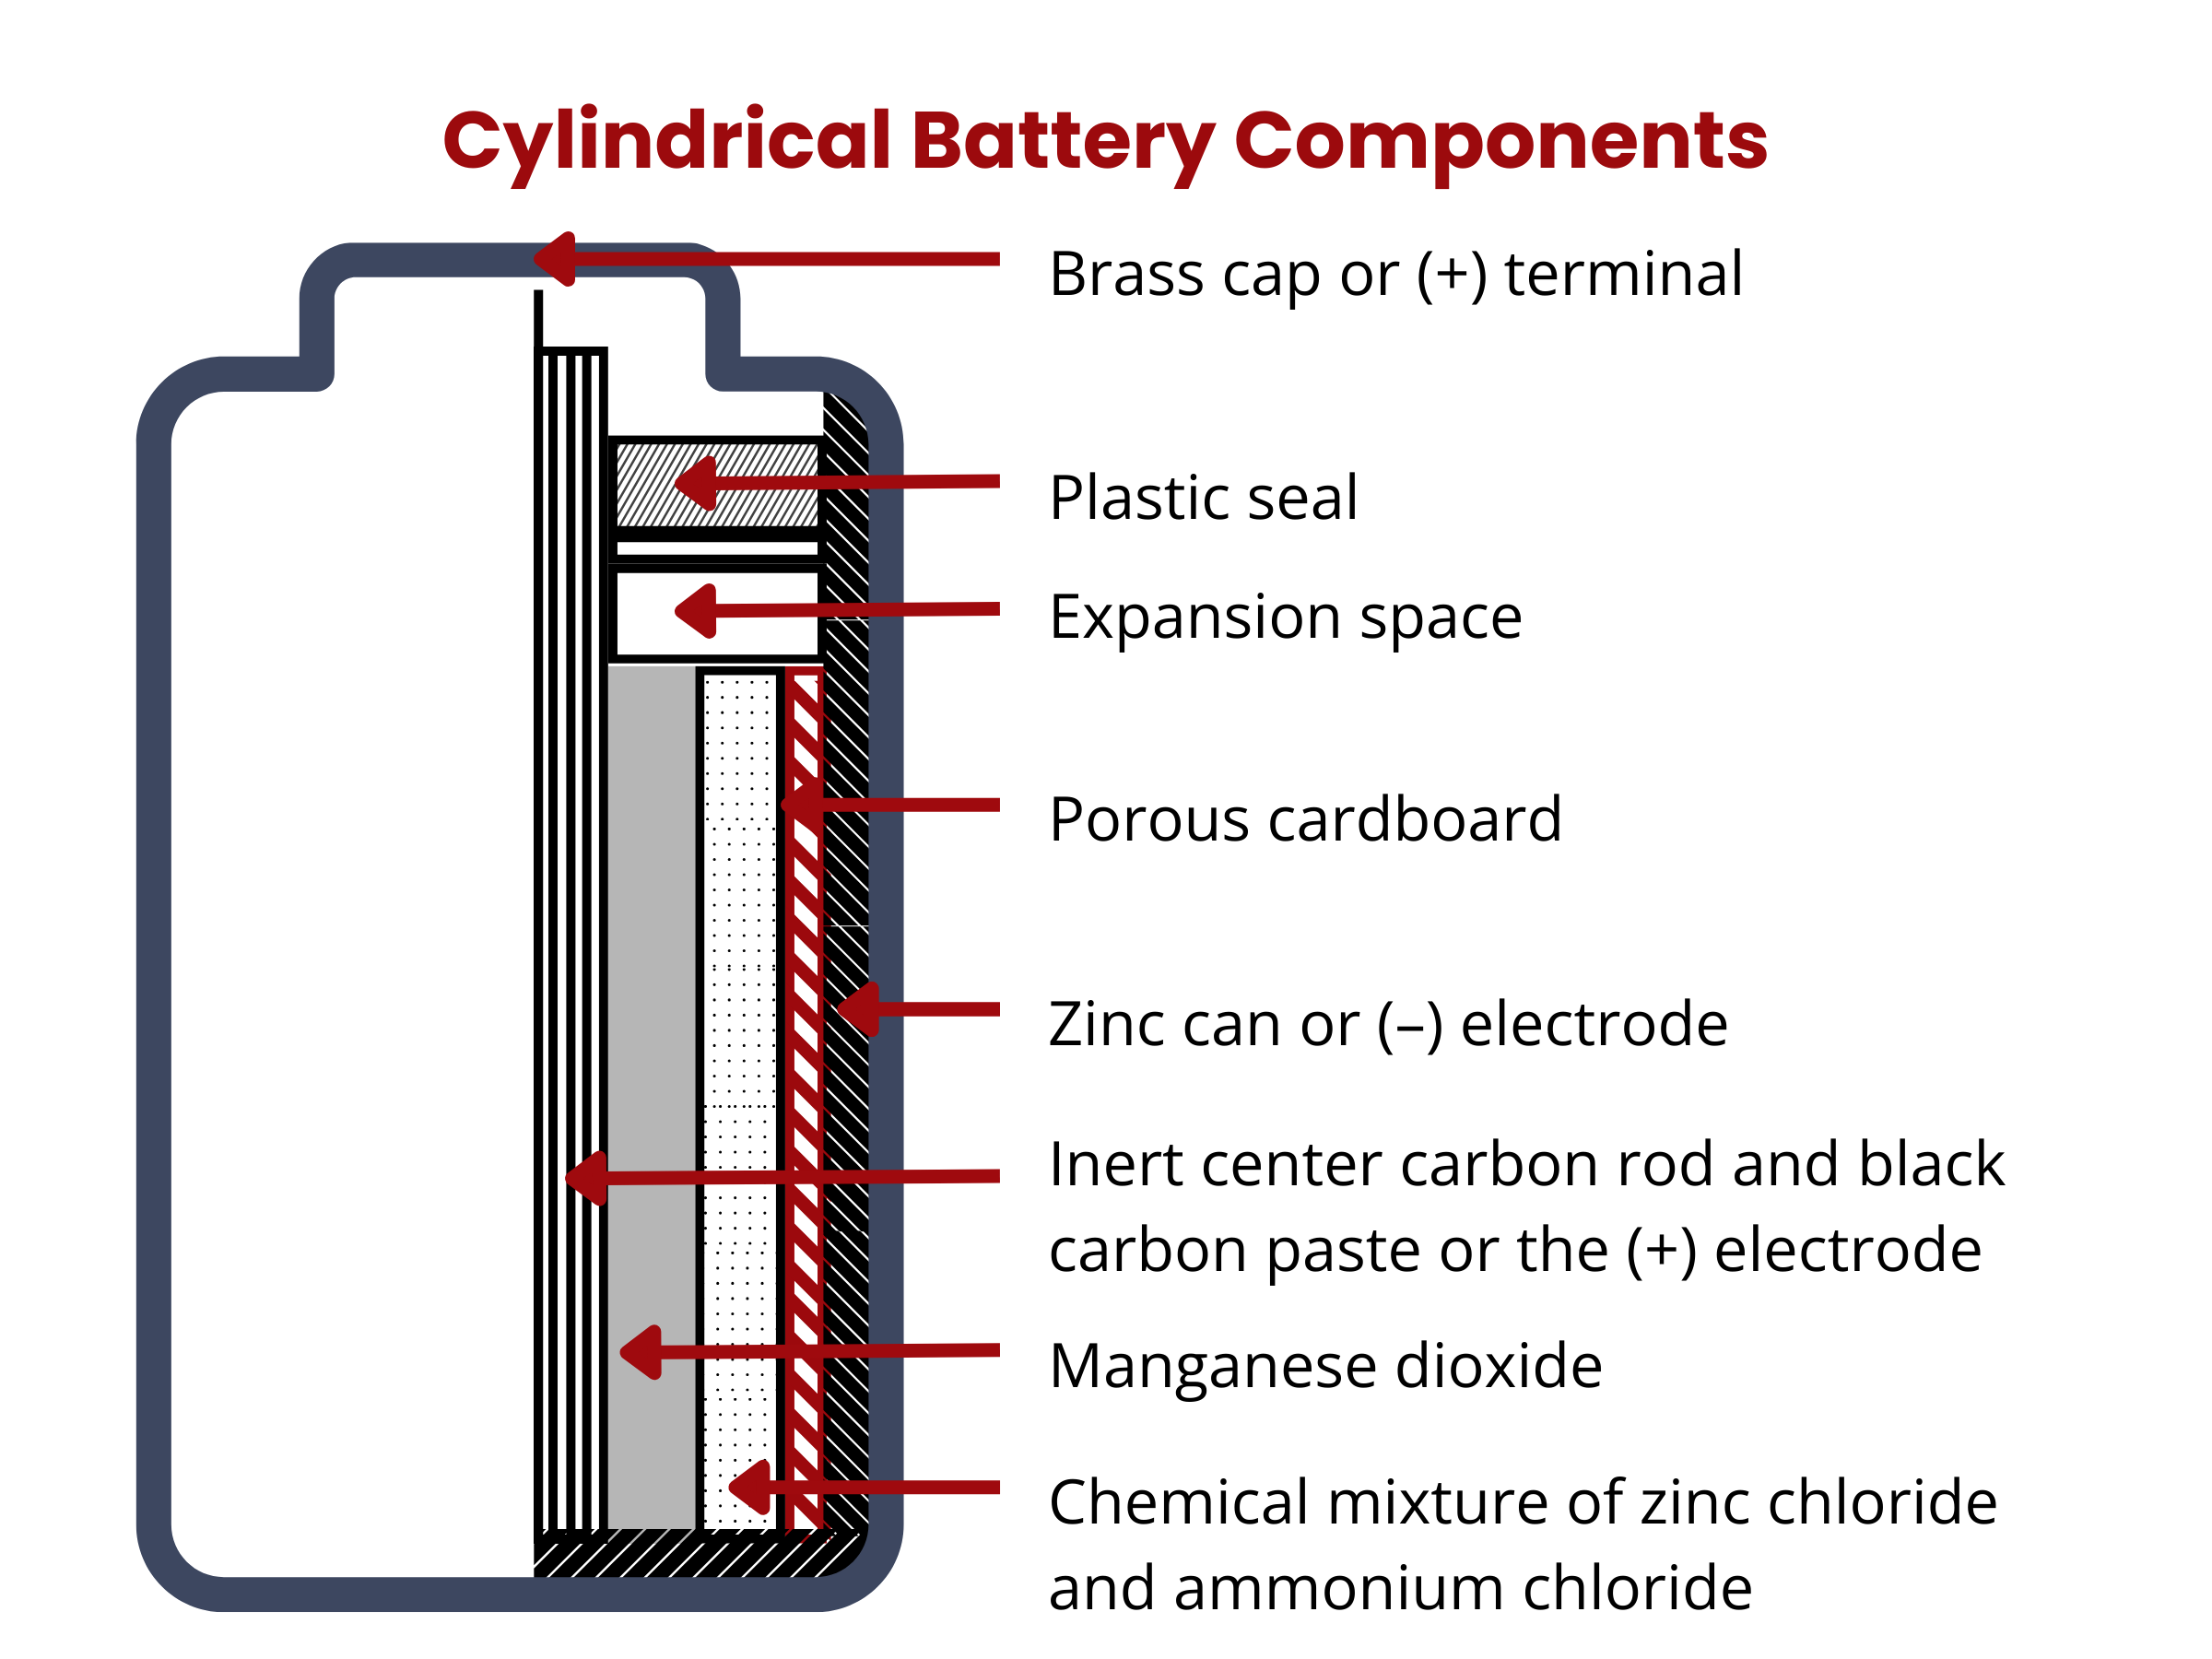 Cylindrical battery components